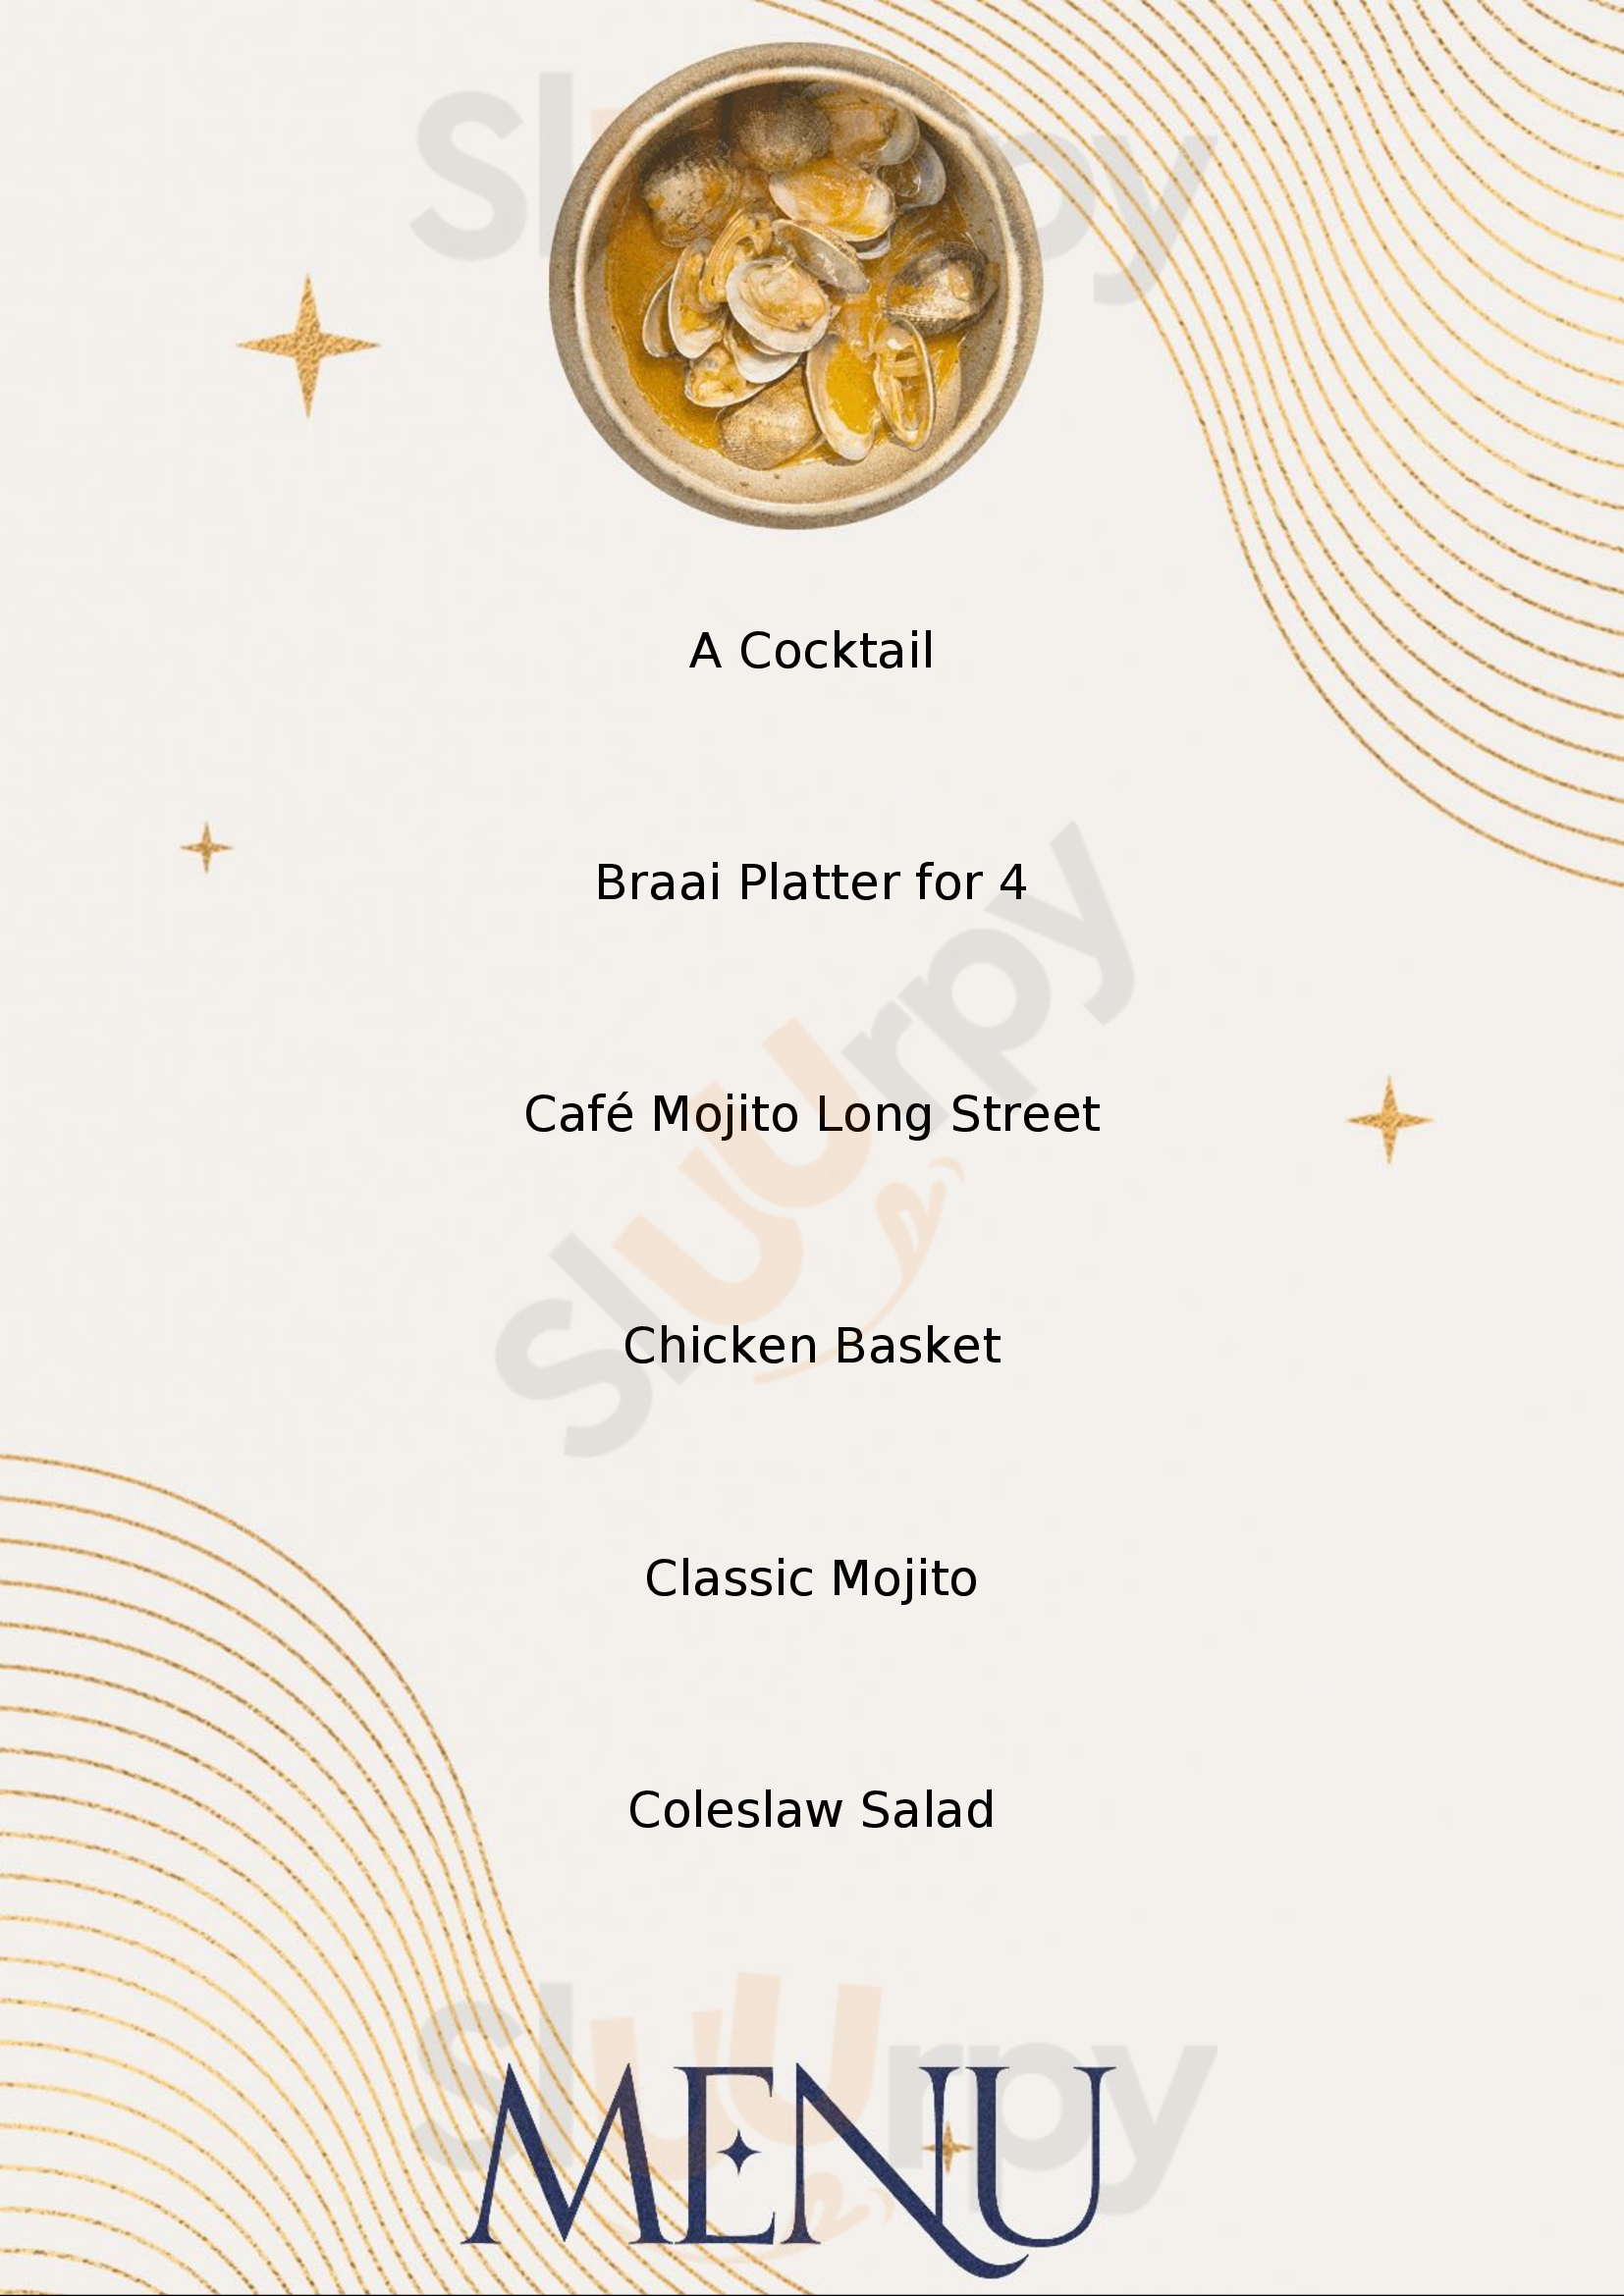 Cafe Mojito Long Street Cape Town Central Menu - 1